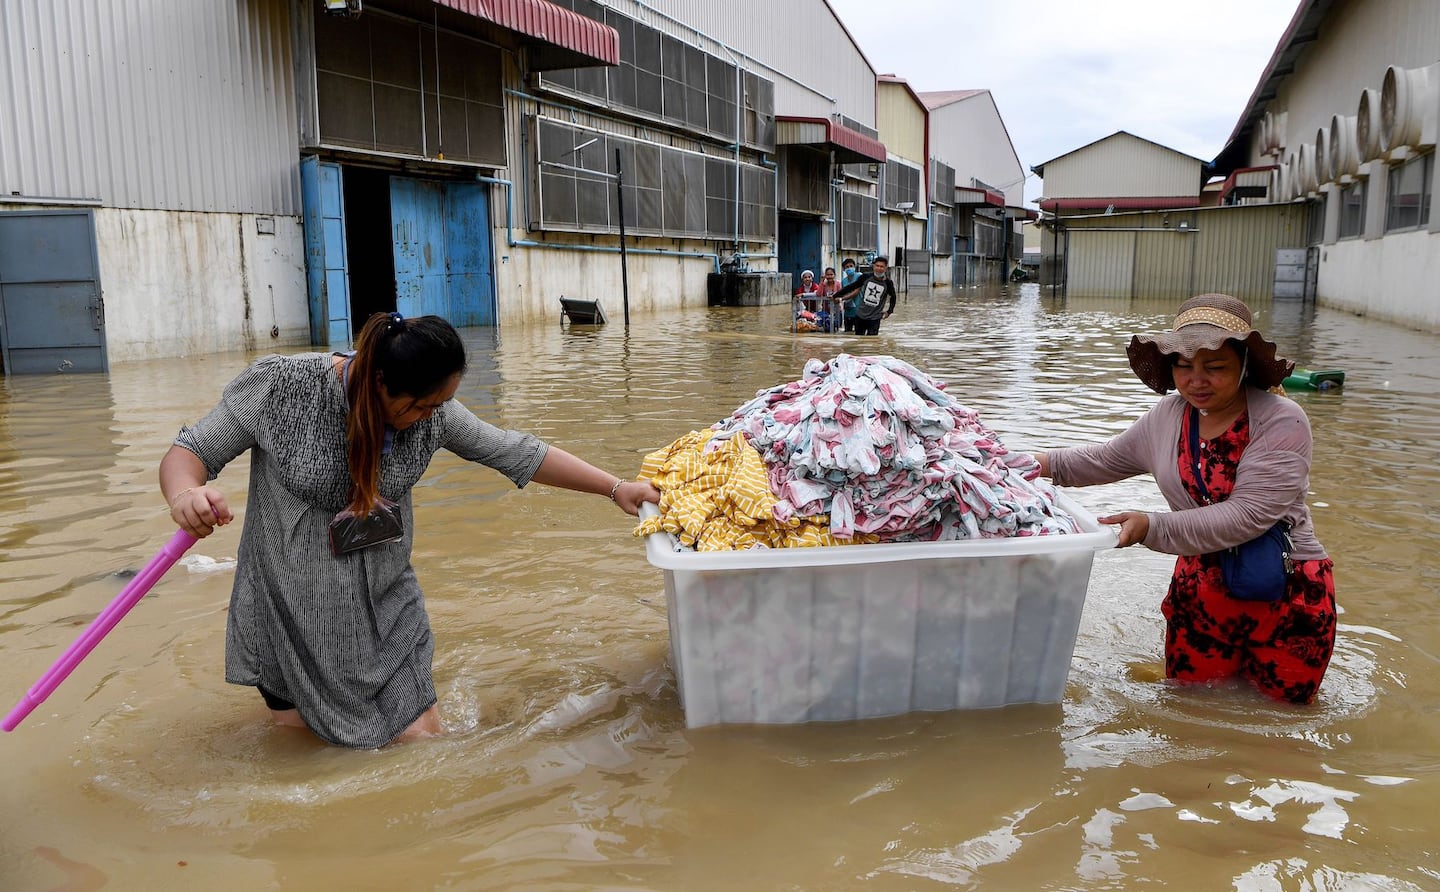 Workers salvage clothes from a factory through floodwaters on the outskirts of Phnom Penh in 2020.